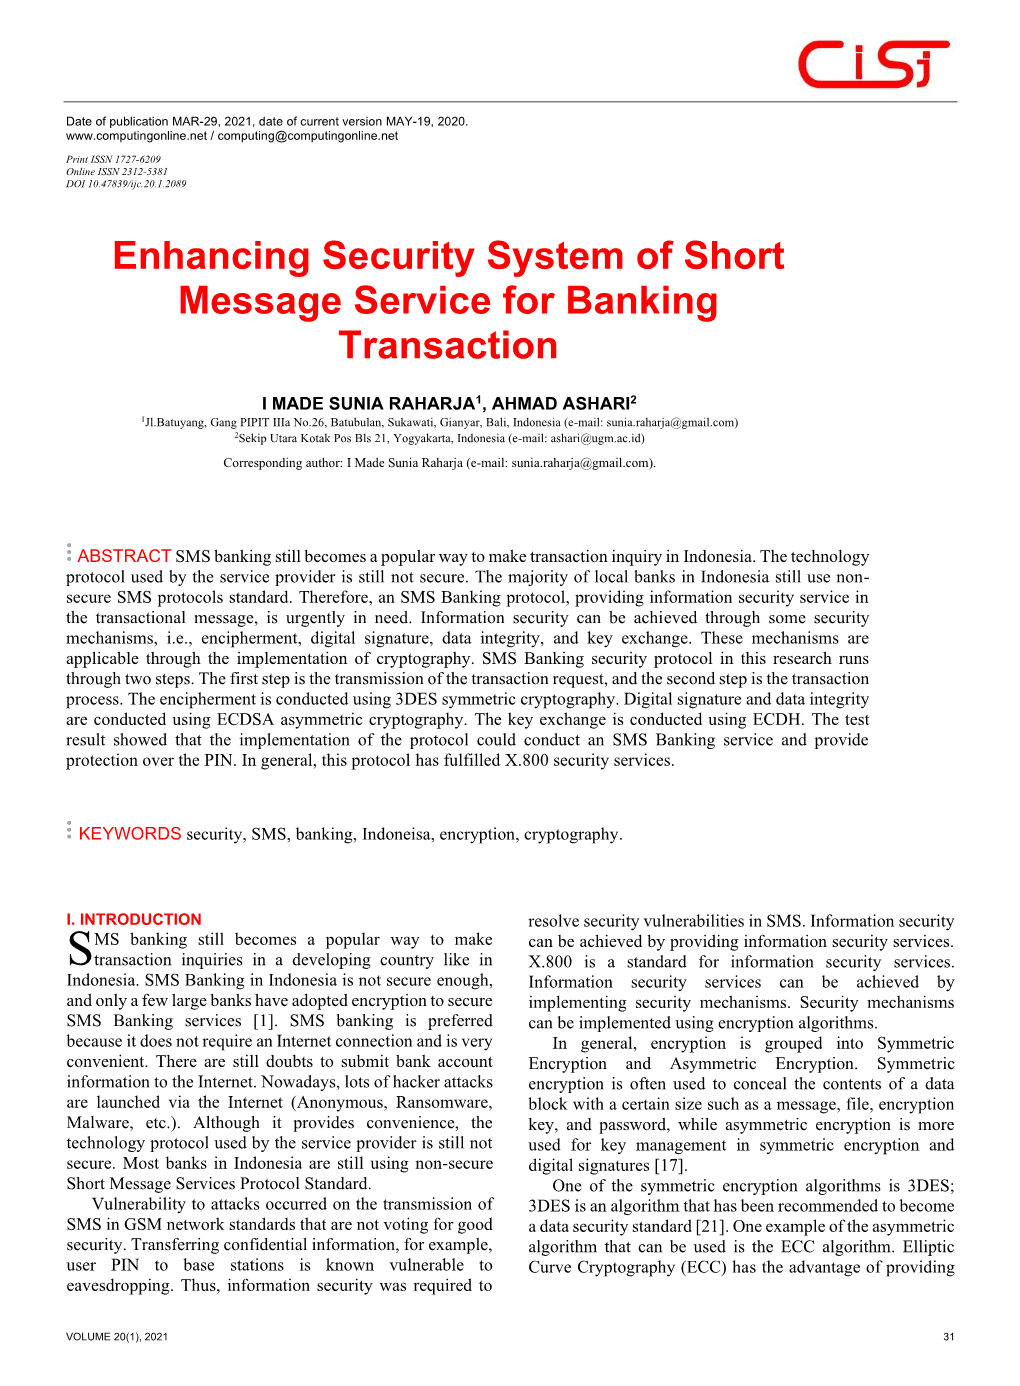 Enhancing Security System of Short Message Service for Banking Transaction